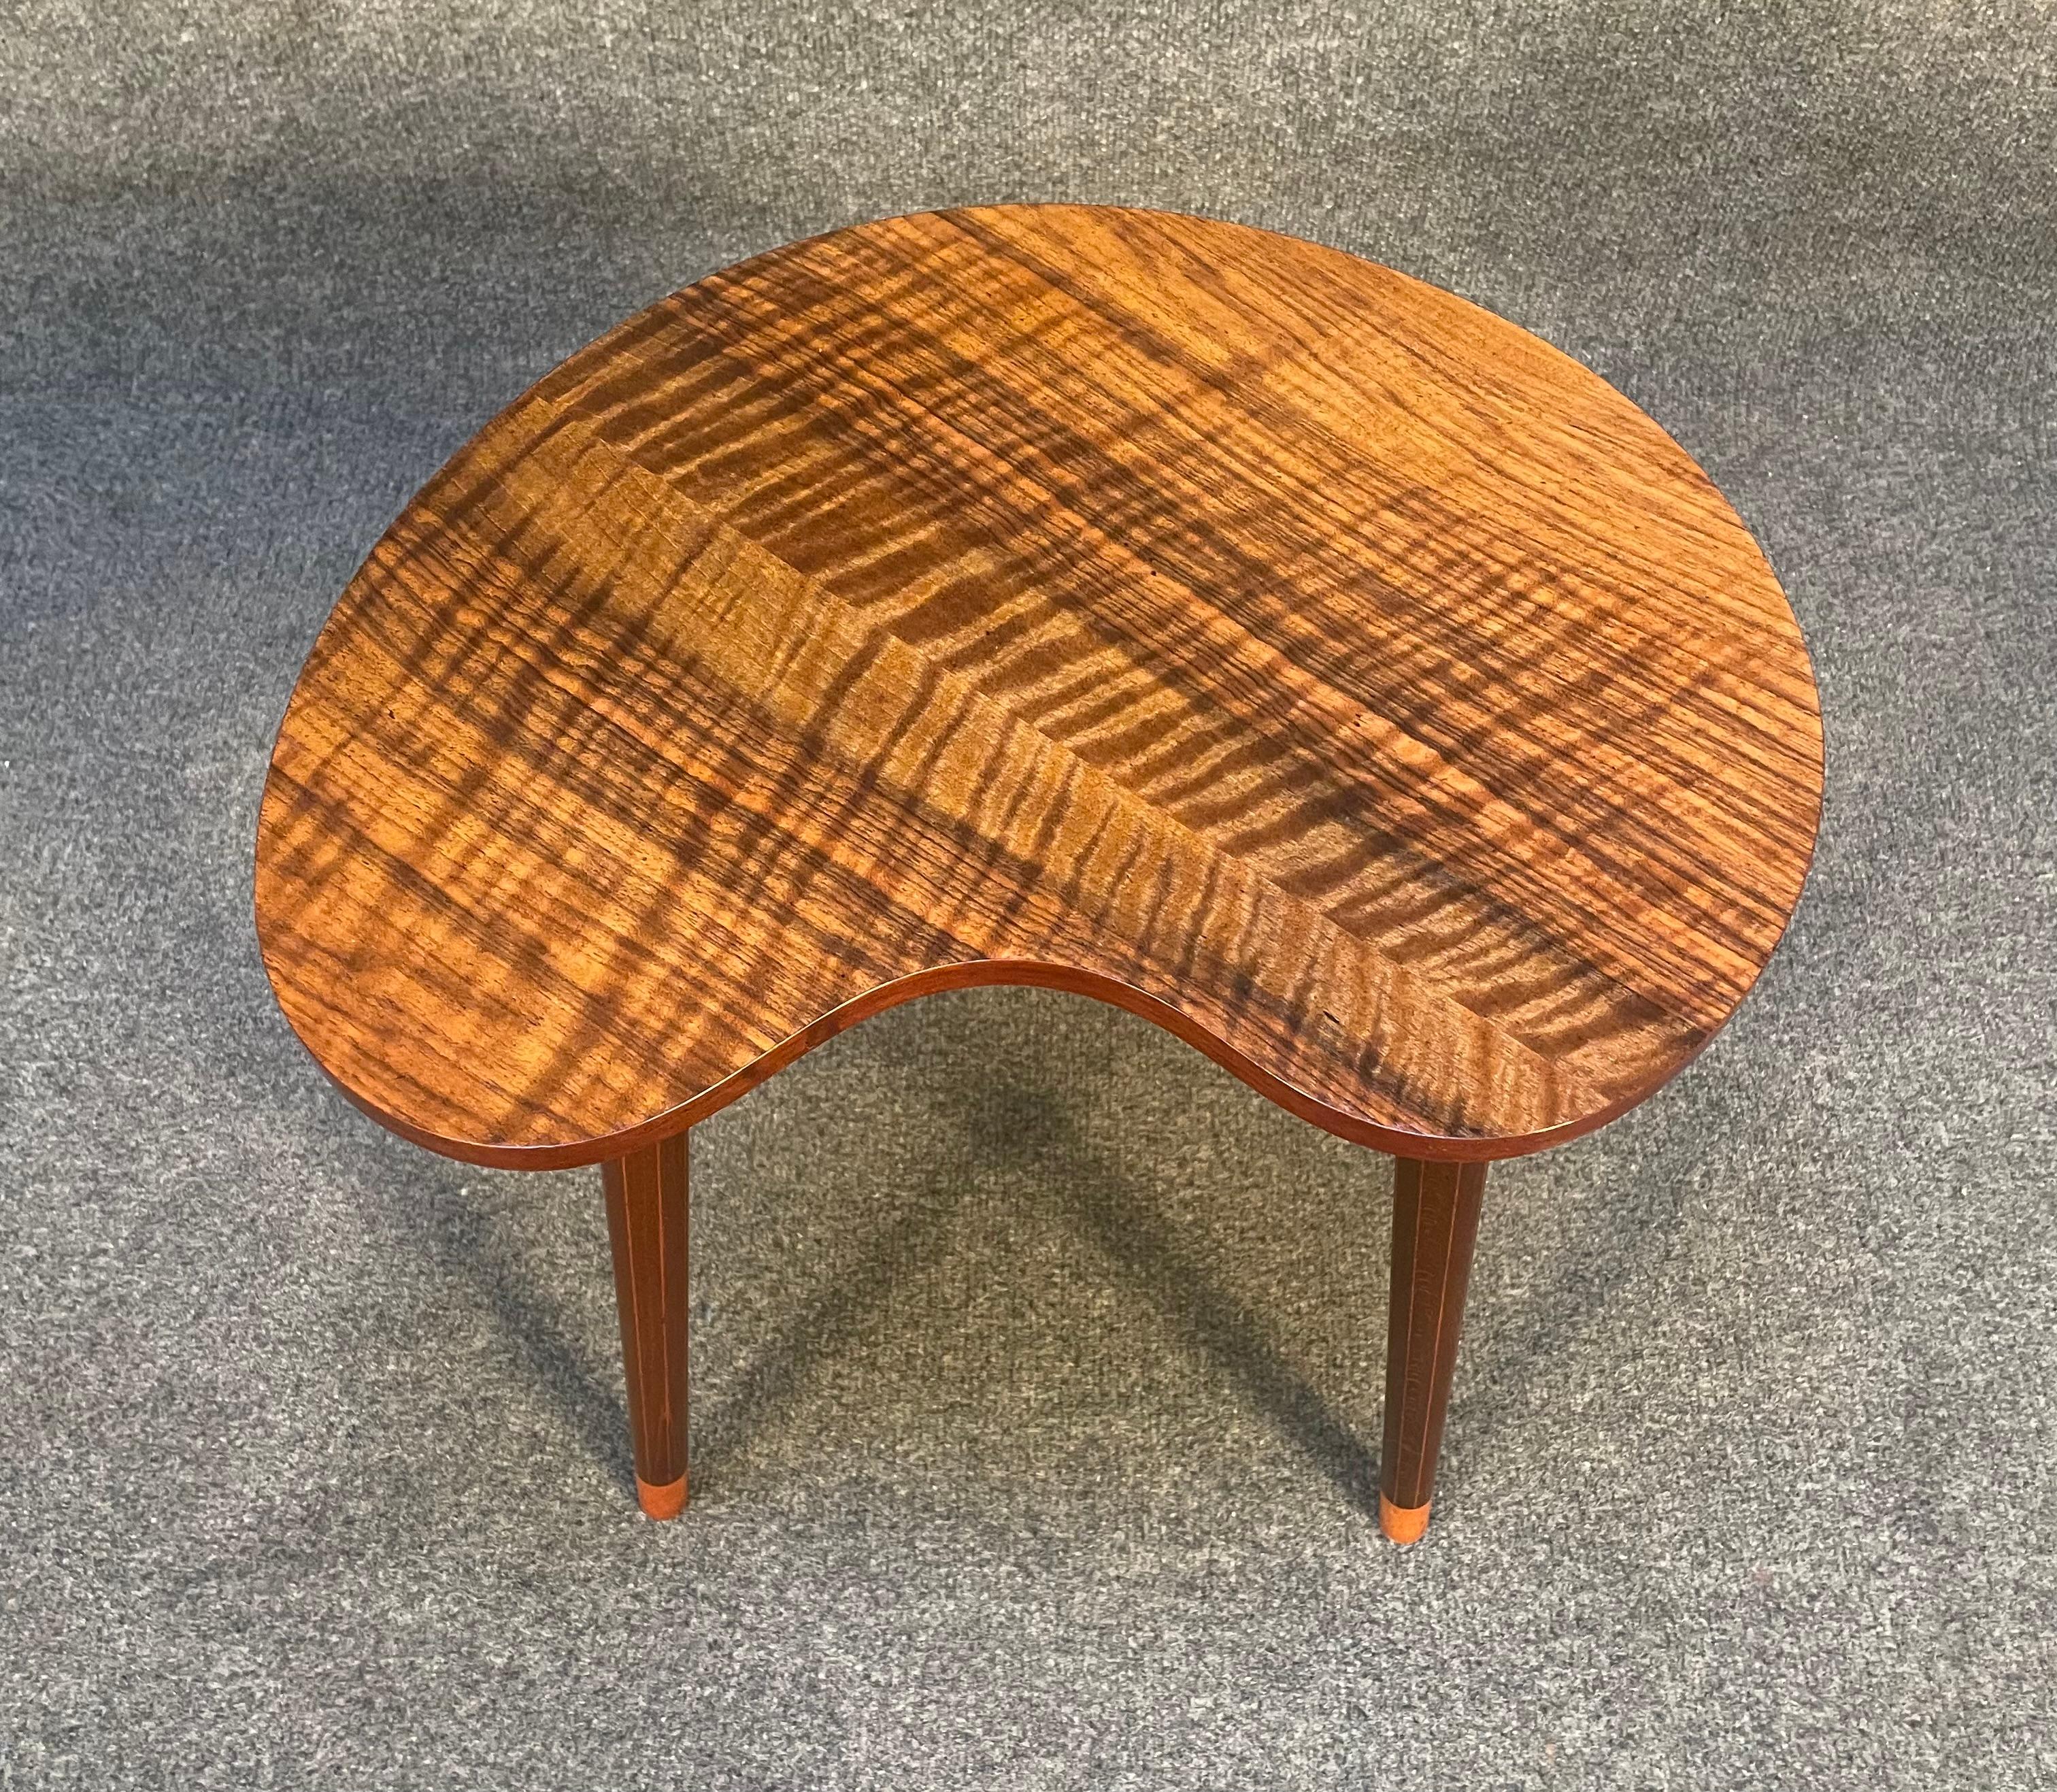 Here is a beautiful Scandinavian Modern end table in walnut manufactured by Gorm Mobler in the 1960s in Denmark.
This special side table, recently imported from Europe to California before its refinishing, features amazing grain details on its